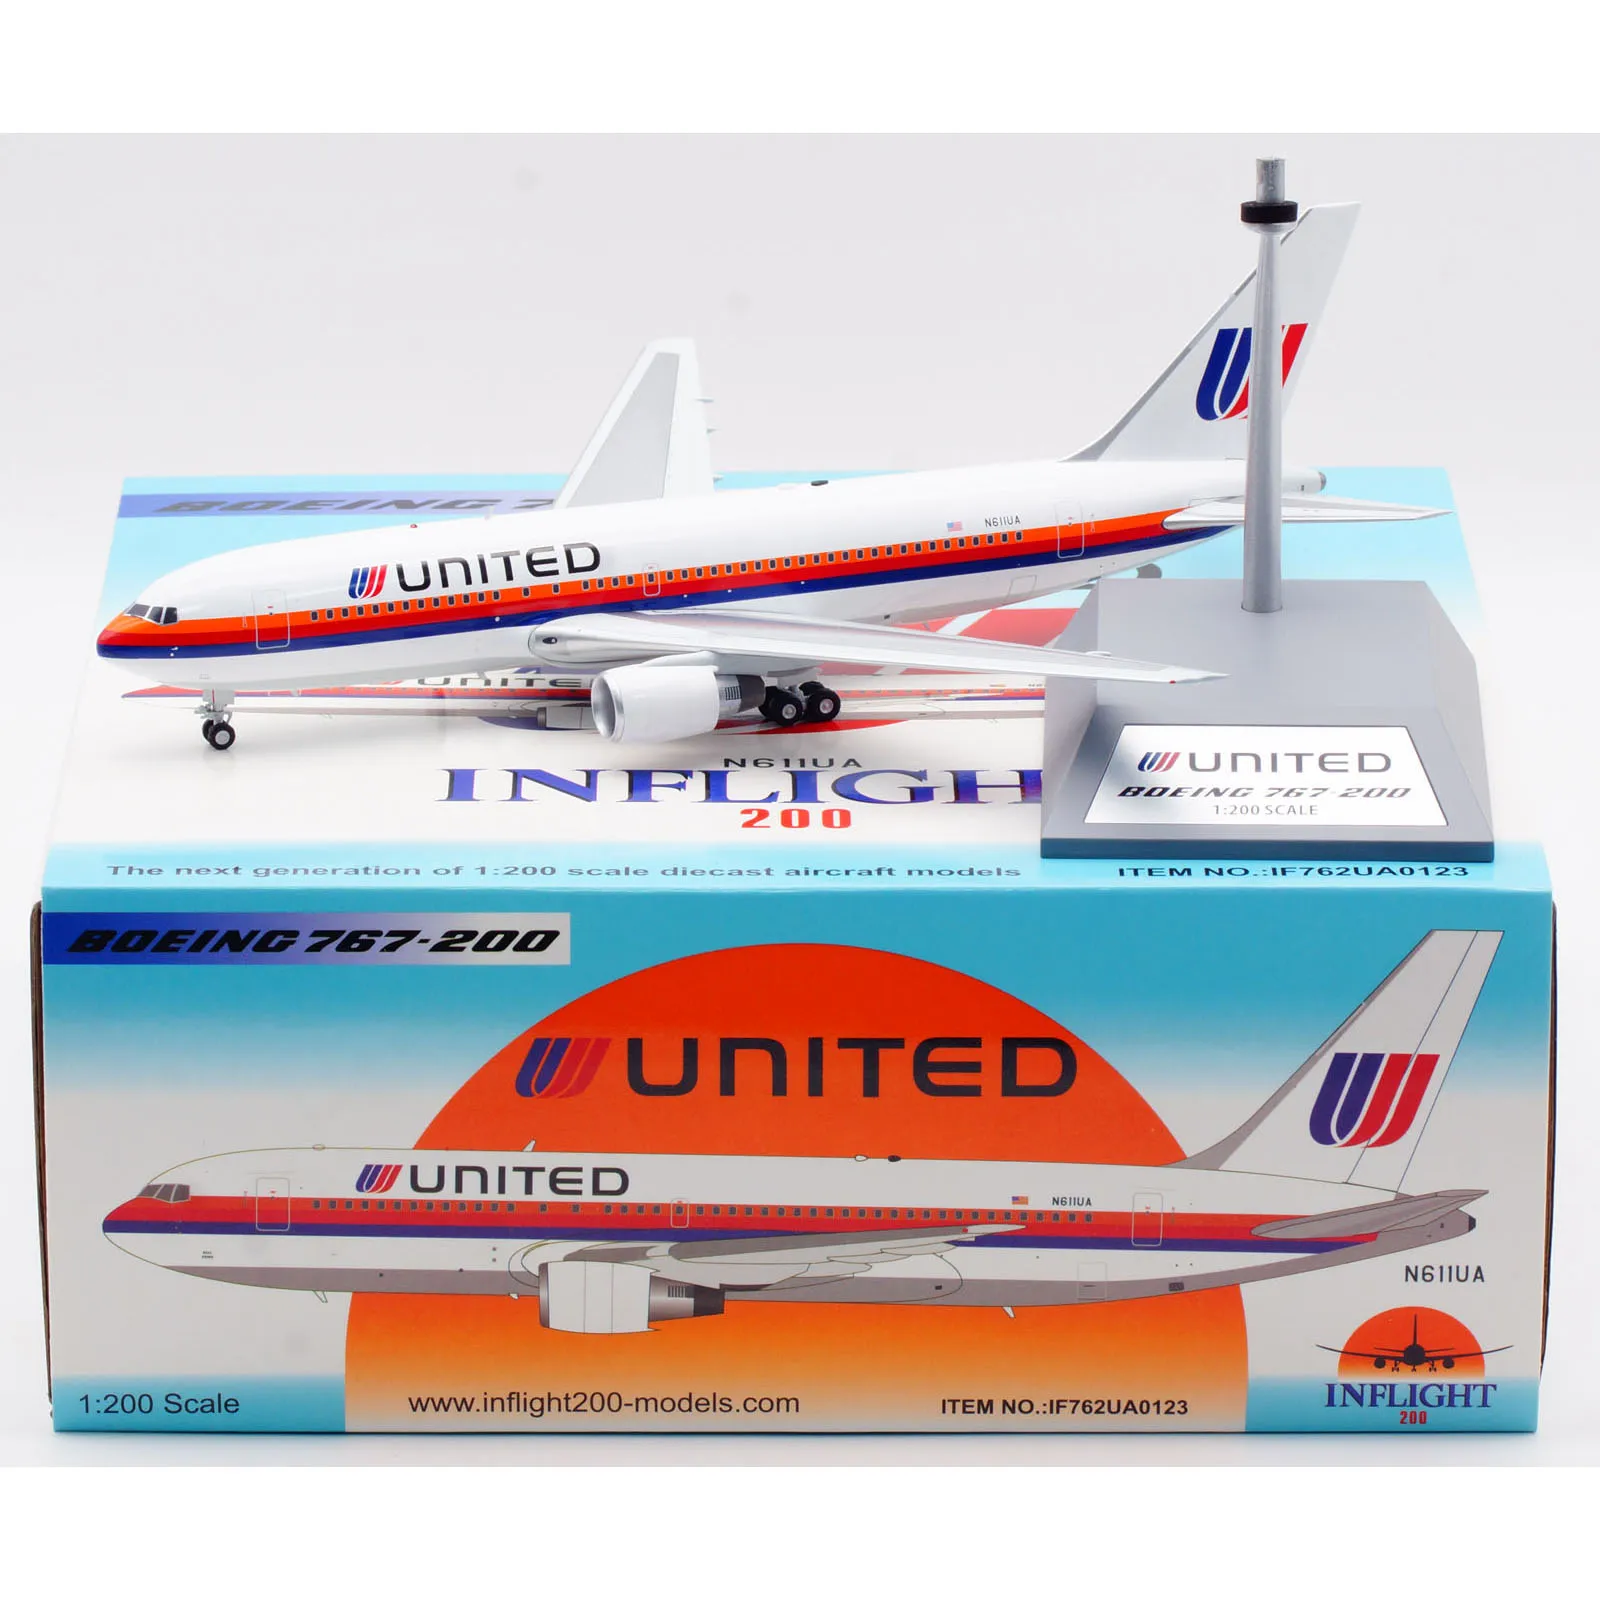 

IF762UA0123 Alloy Collectible Plane Gift INFLIGHT 1:200 United Airlines Boeing B767-200 Diecast Aircraft Jet Model N611UA